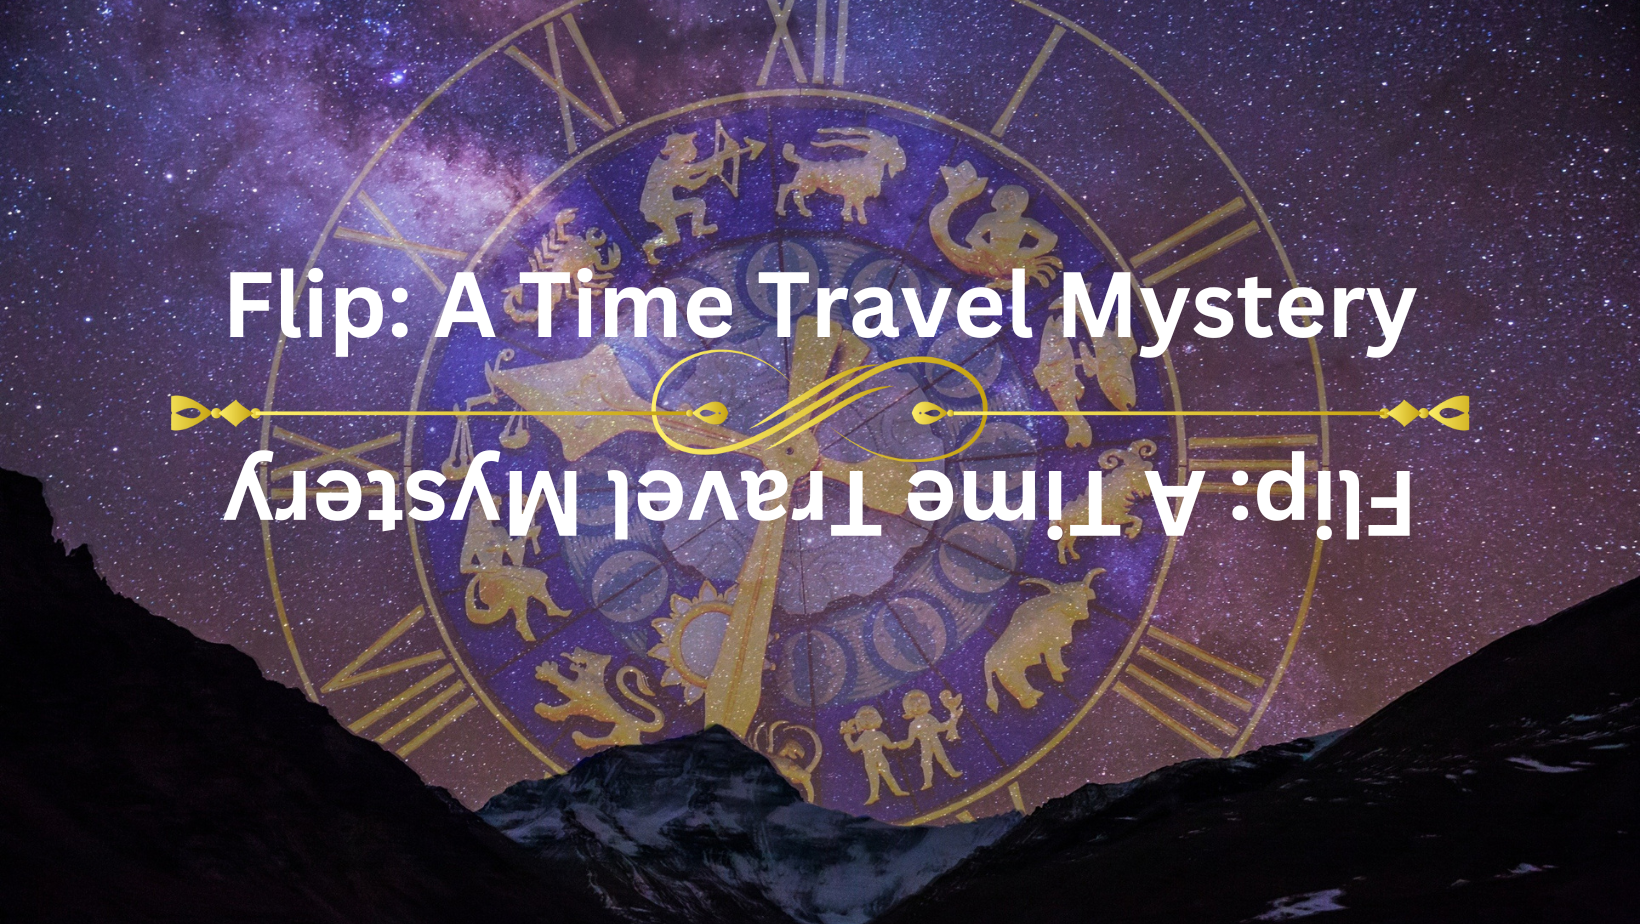 Flip: A Time Travel Mystery